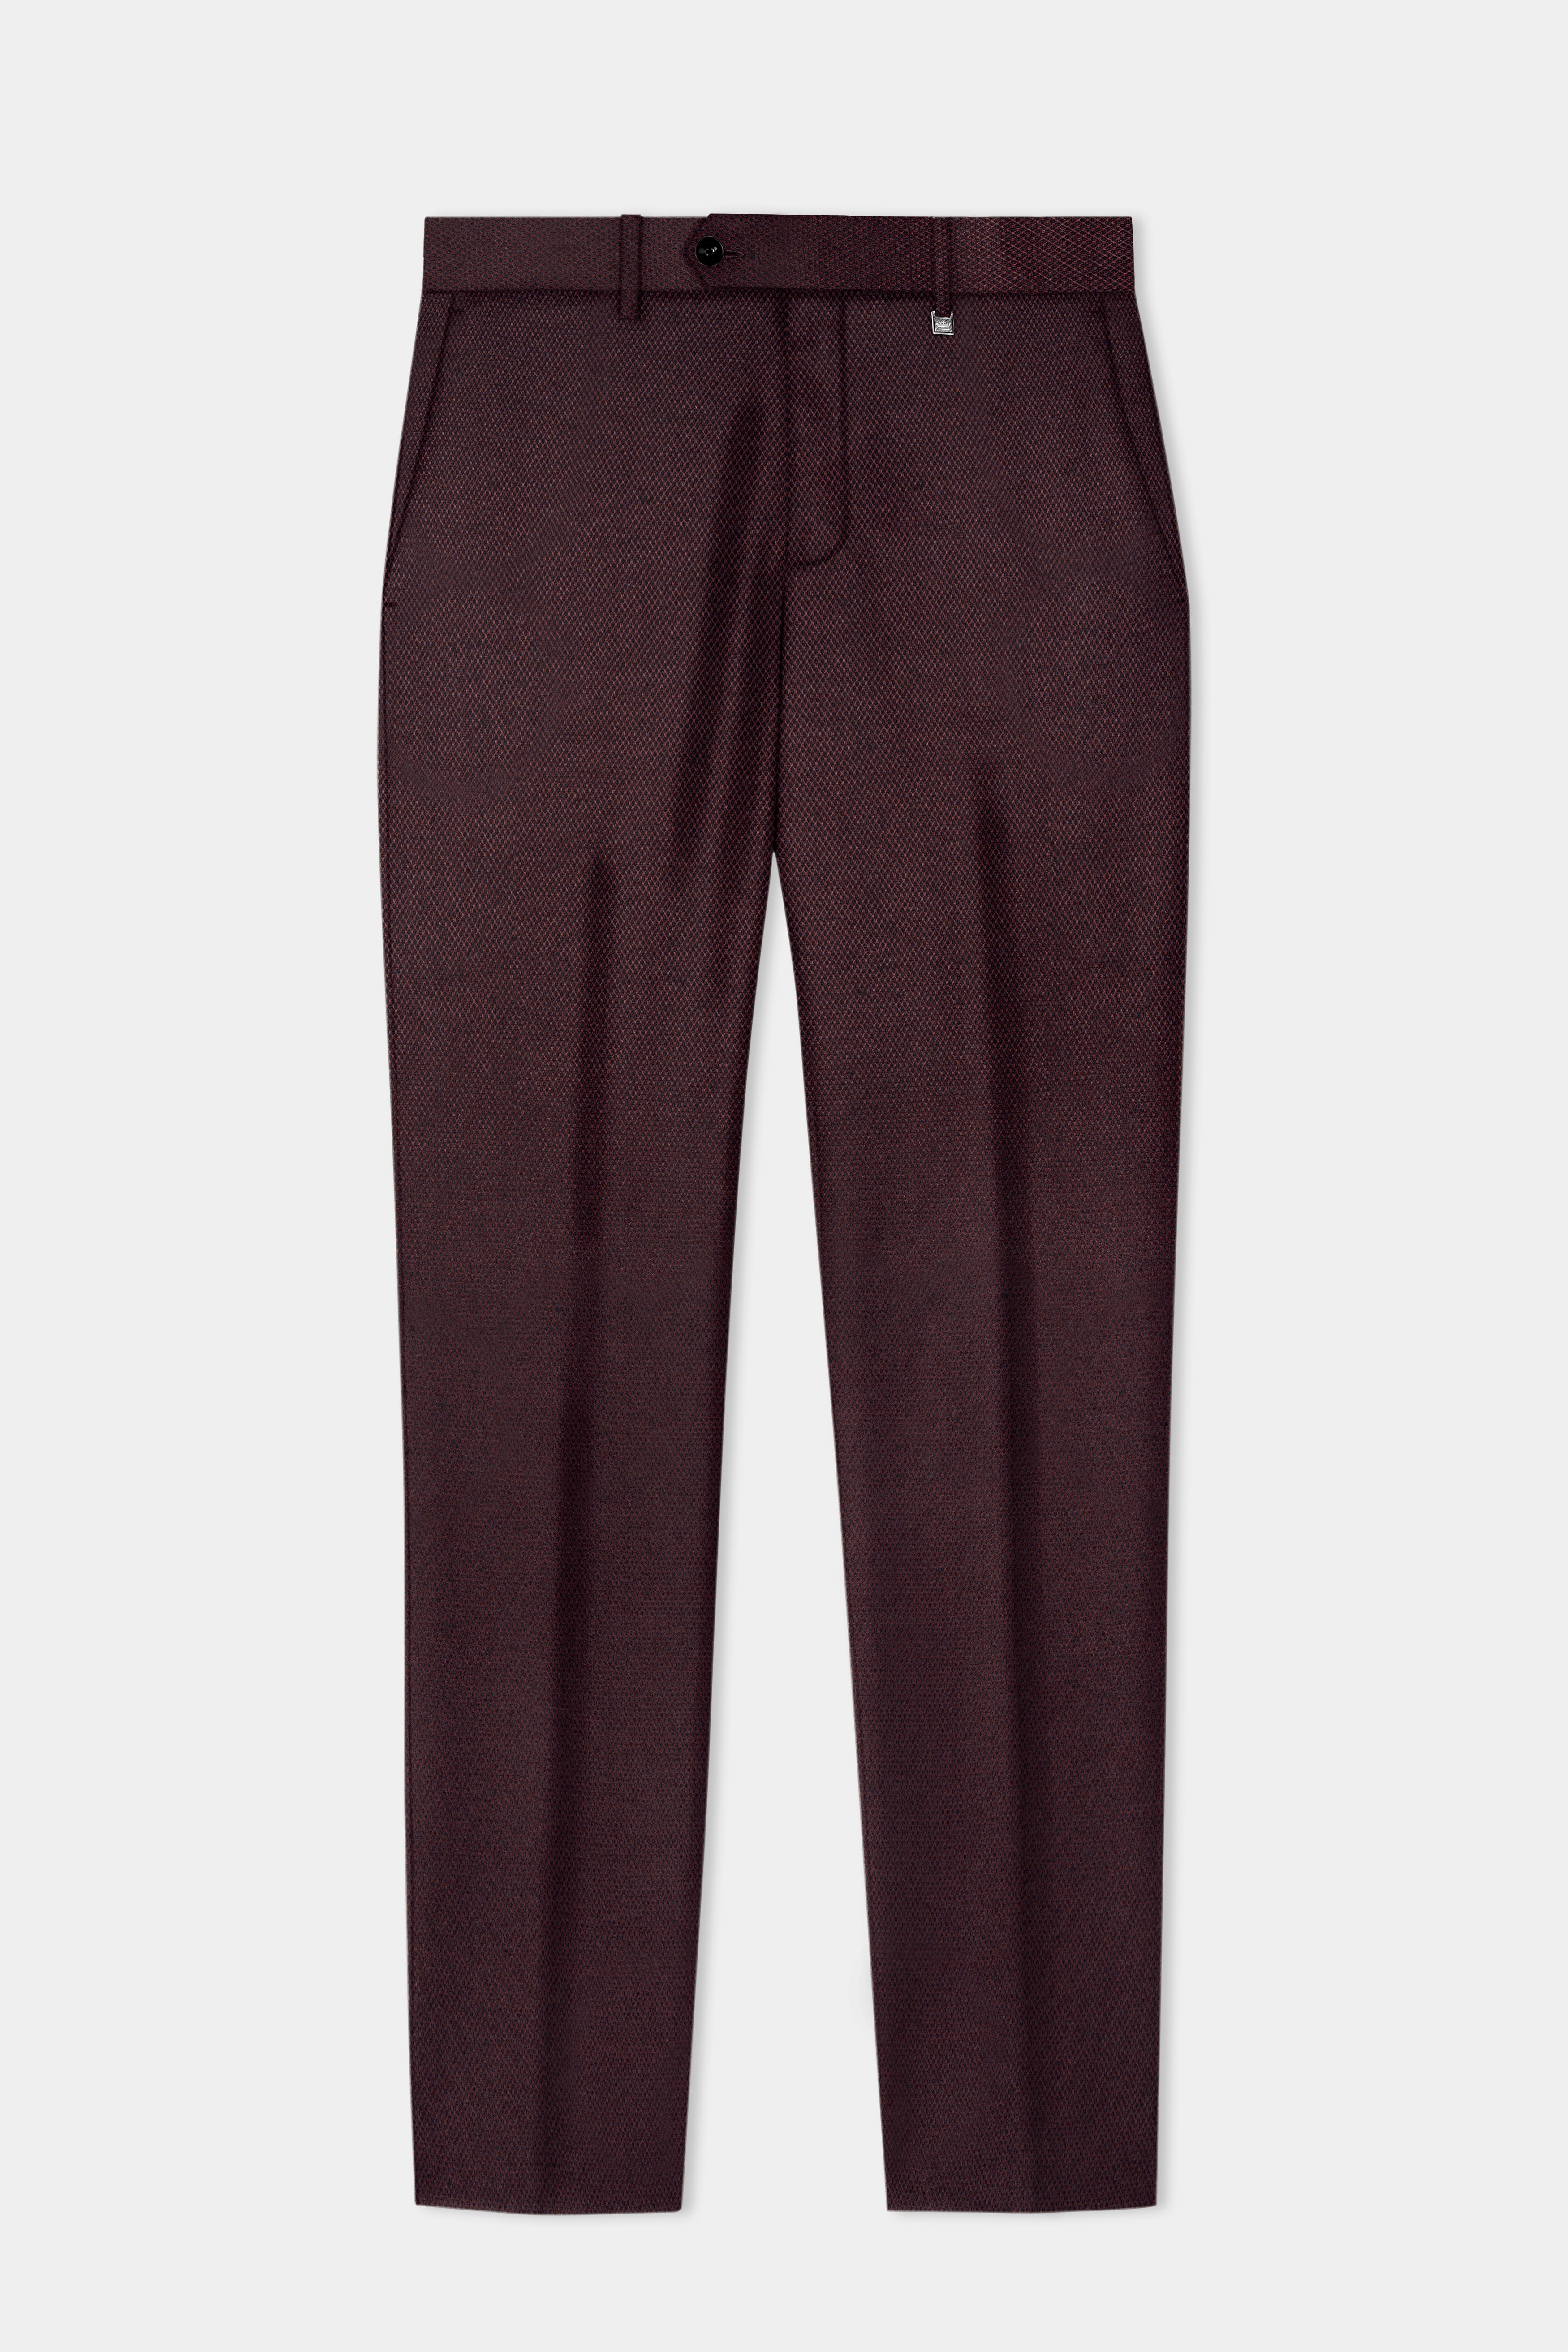 Eclipse Maroon Textured Wool Rich Double Breasted Suit